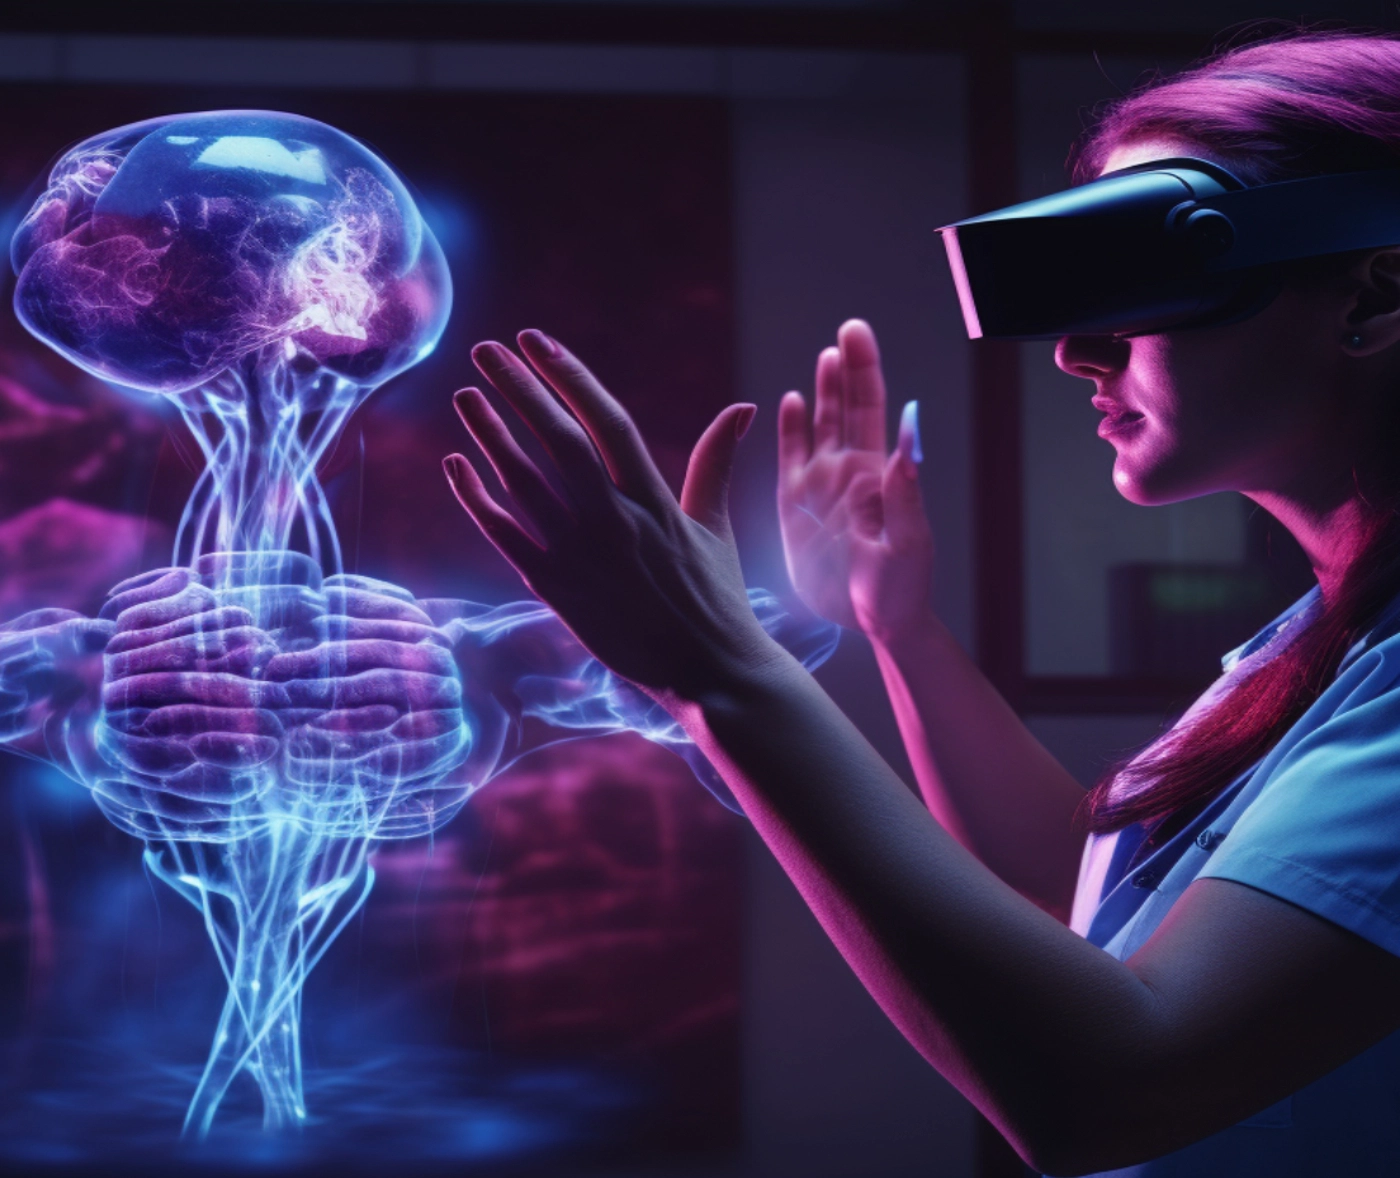 Mixed Reality (MR) is a technology that blends elements of both the physical, real world and the digital, virtual world to create a unified and interactive environment.